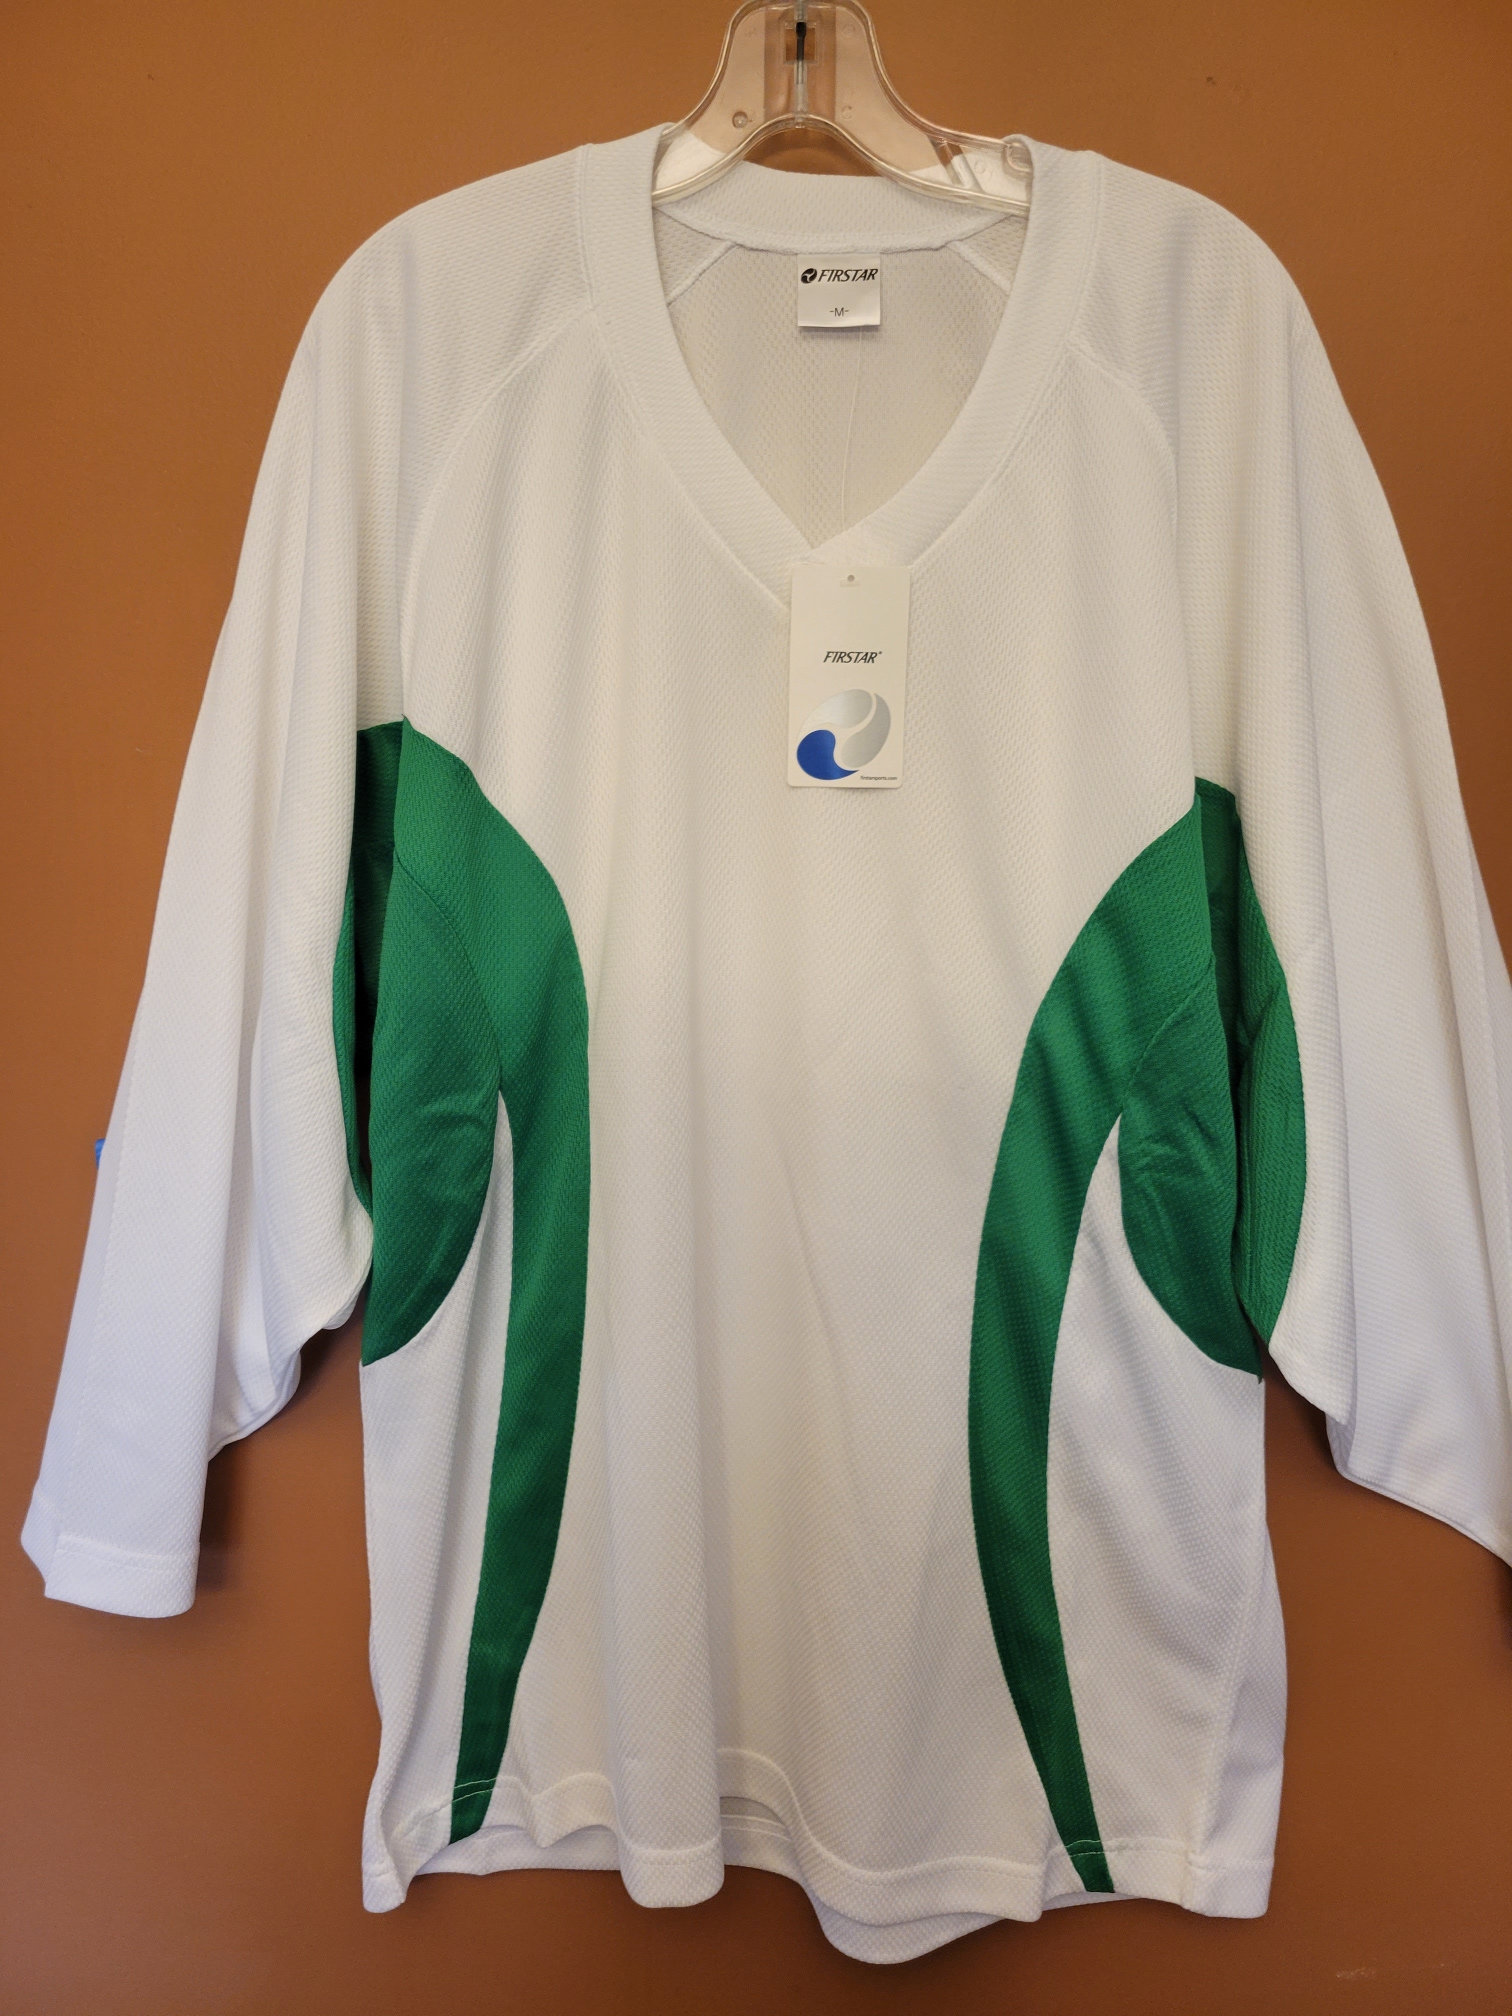 Lot of 12 New Jerseys FIRSTAR Brand White & Green (Sizes in Description)